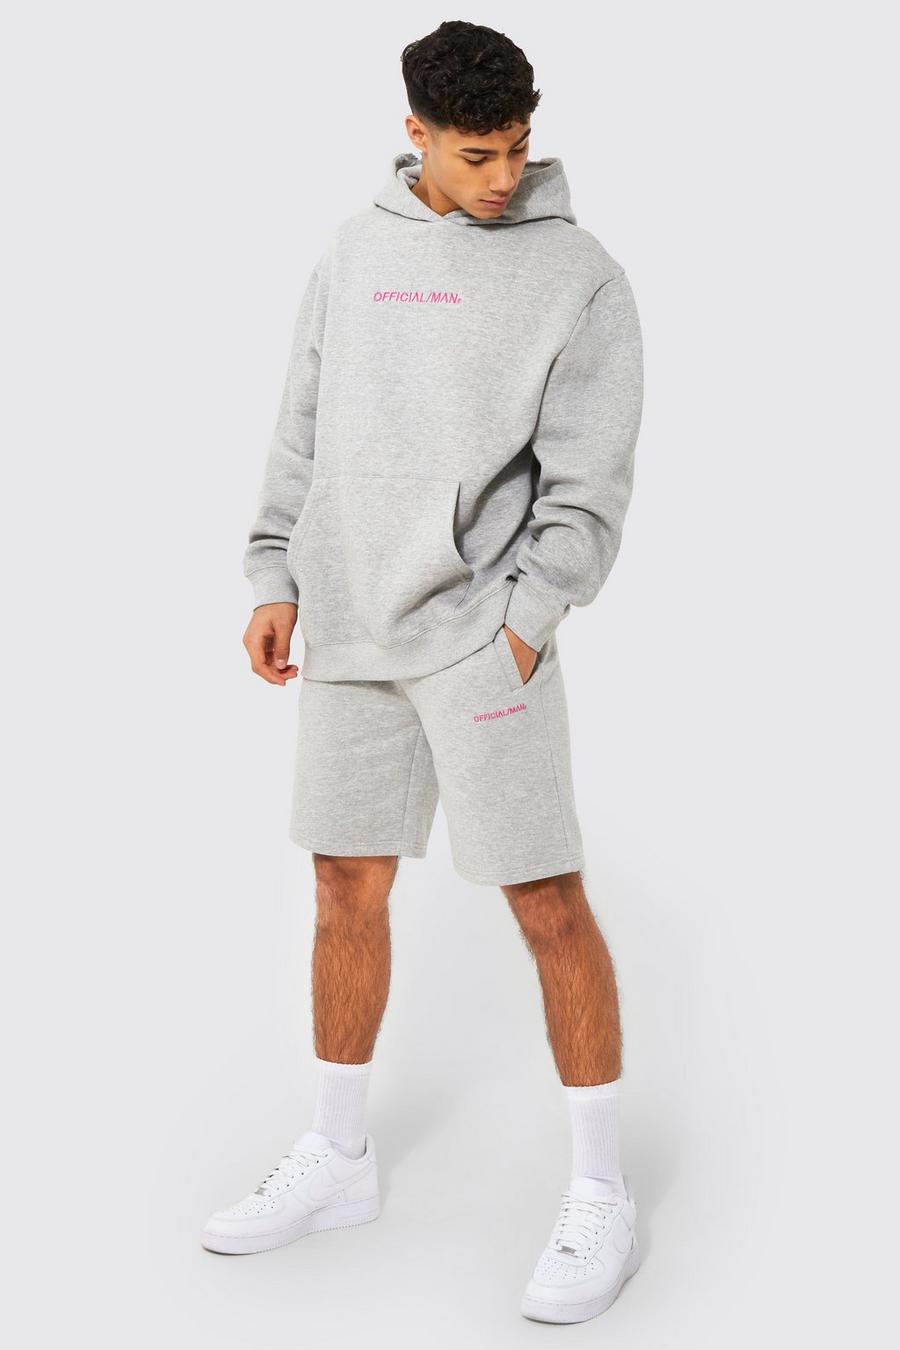 Grey marl Oversized Official Man Hooded Short Tracksuit 1